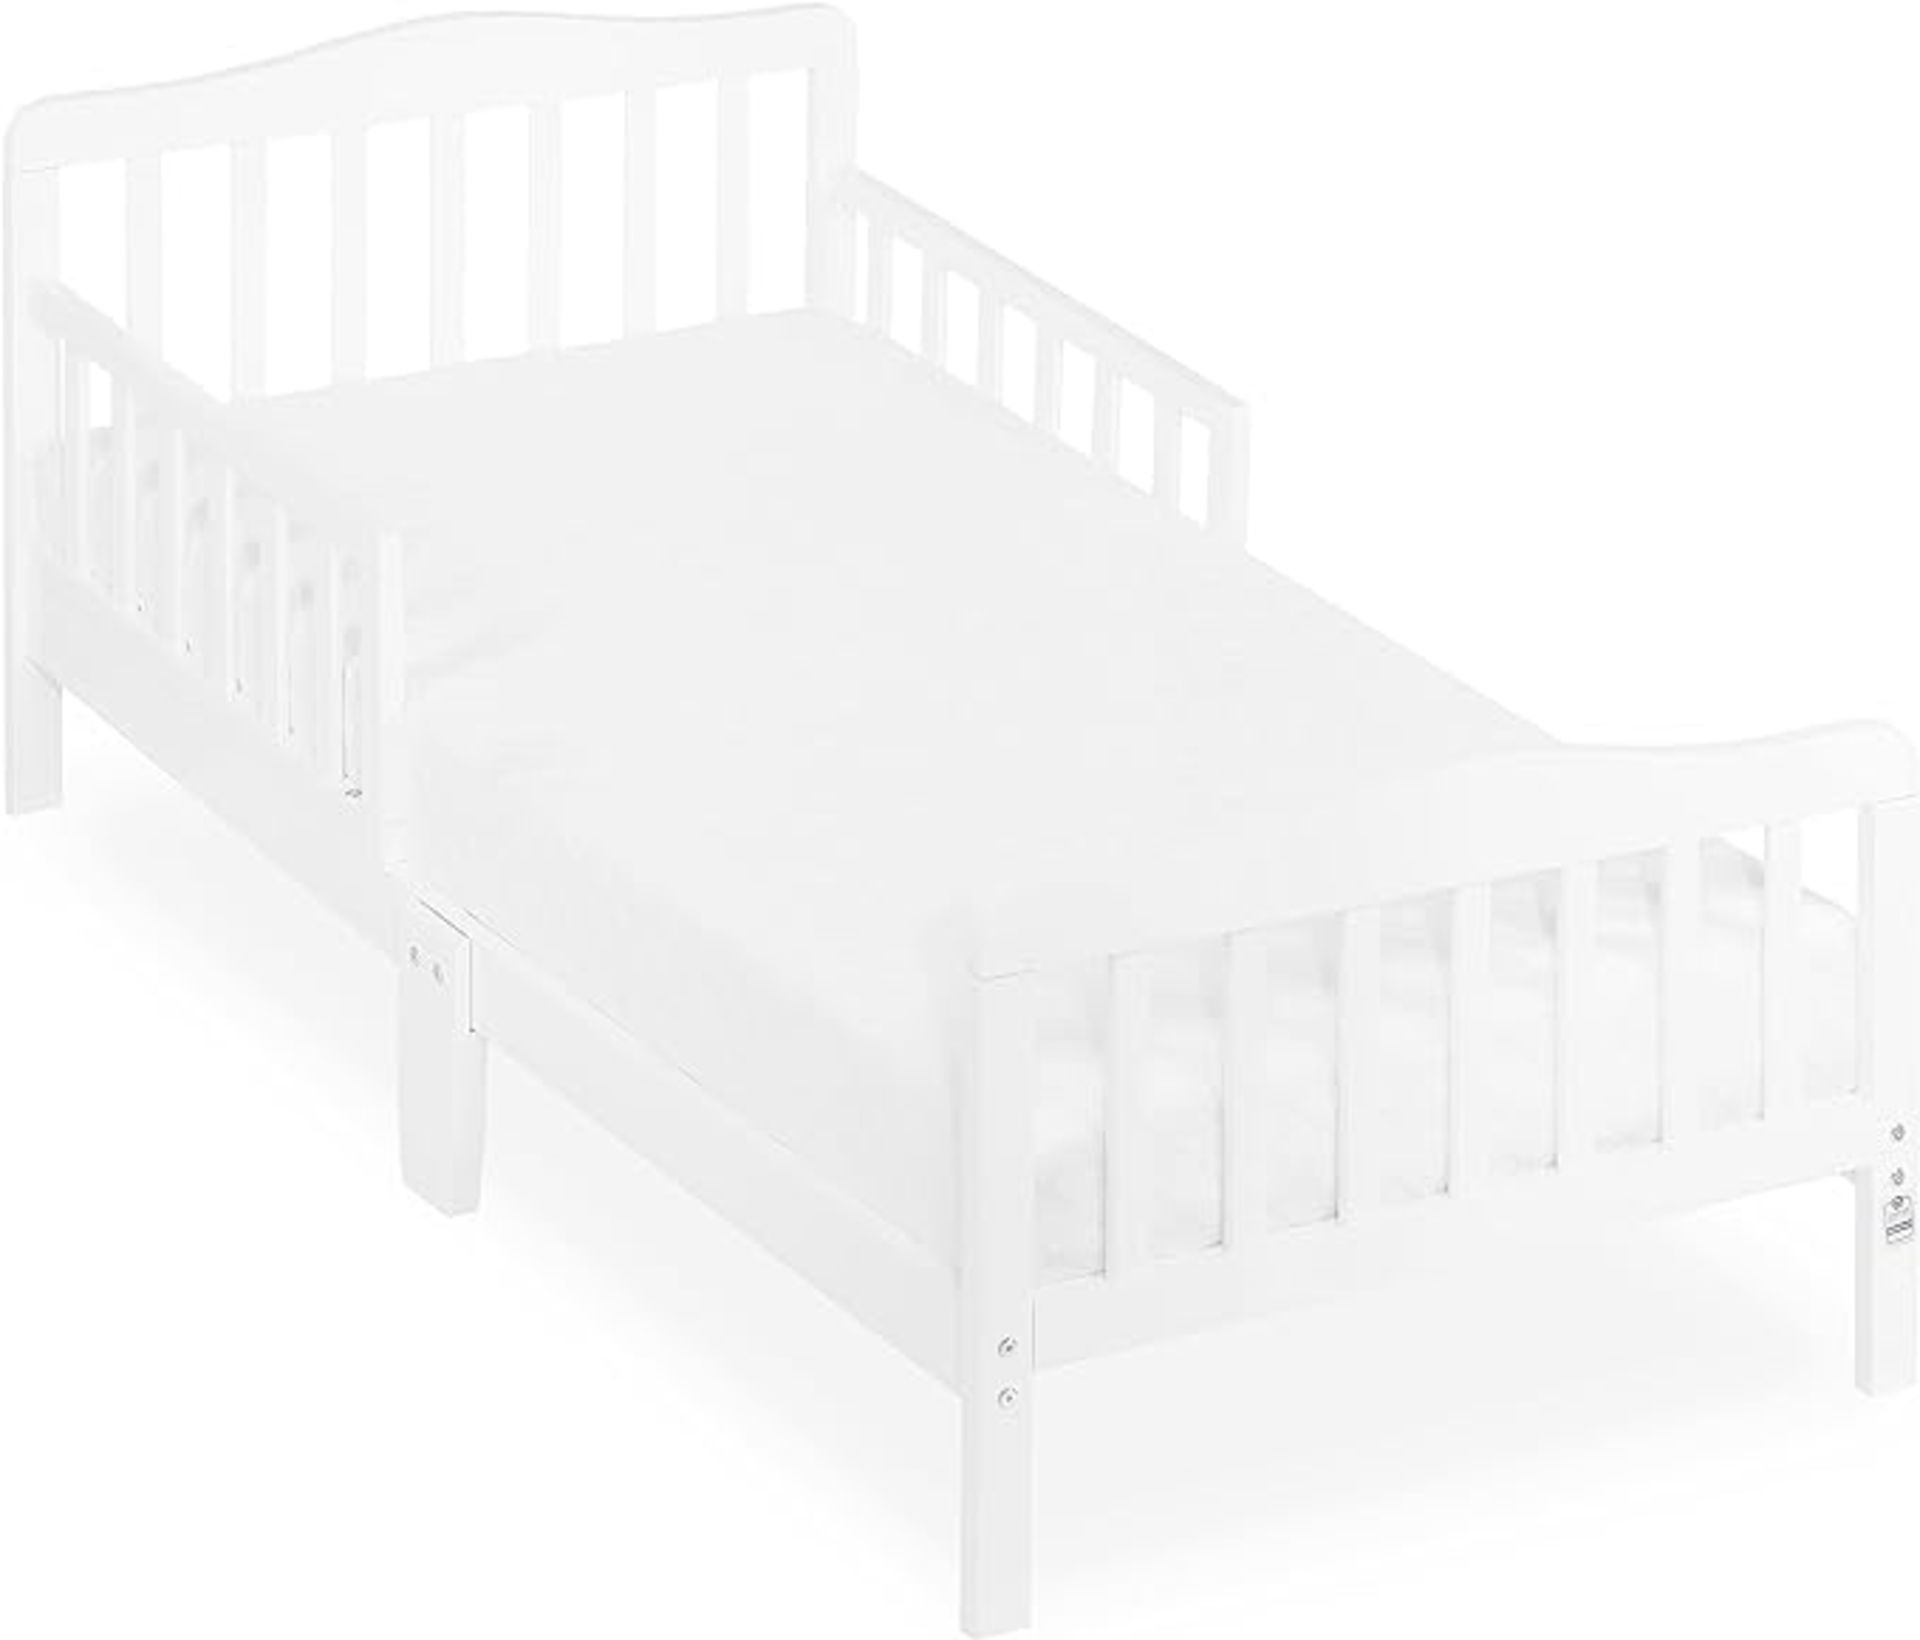 Brand New Dream on Me Classic Toddler Bed. Product dimensionS - 144.8L x 71.1W x 76.2H CM Comes with - Image 5 of 5